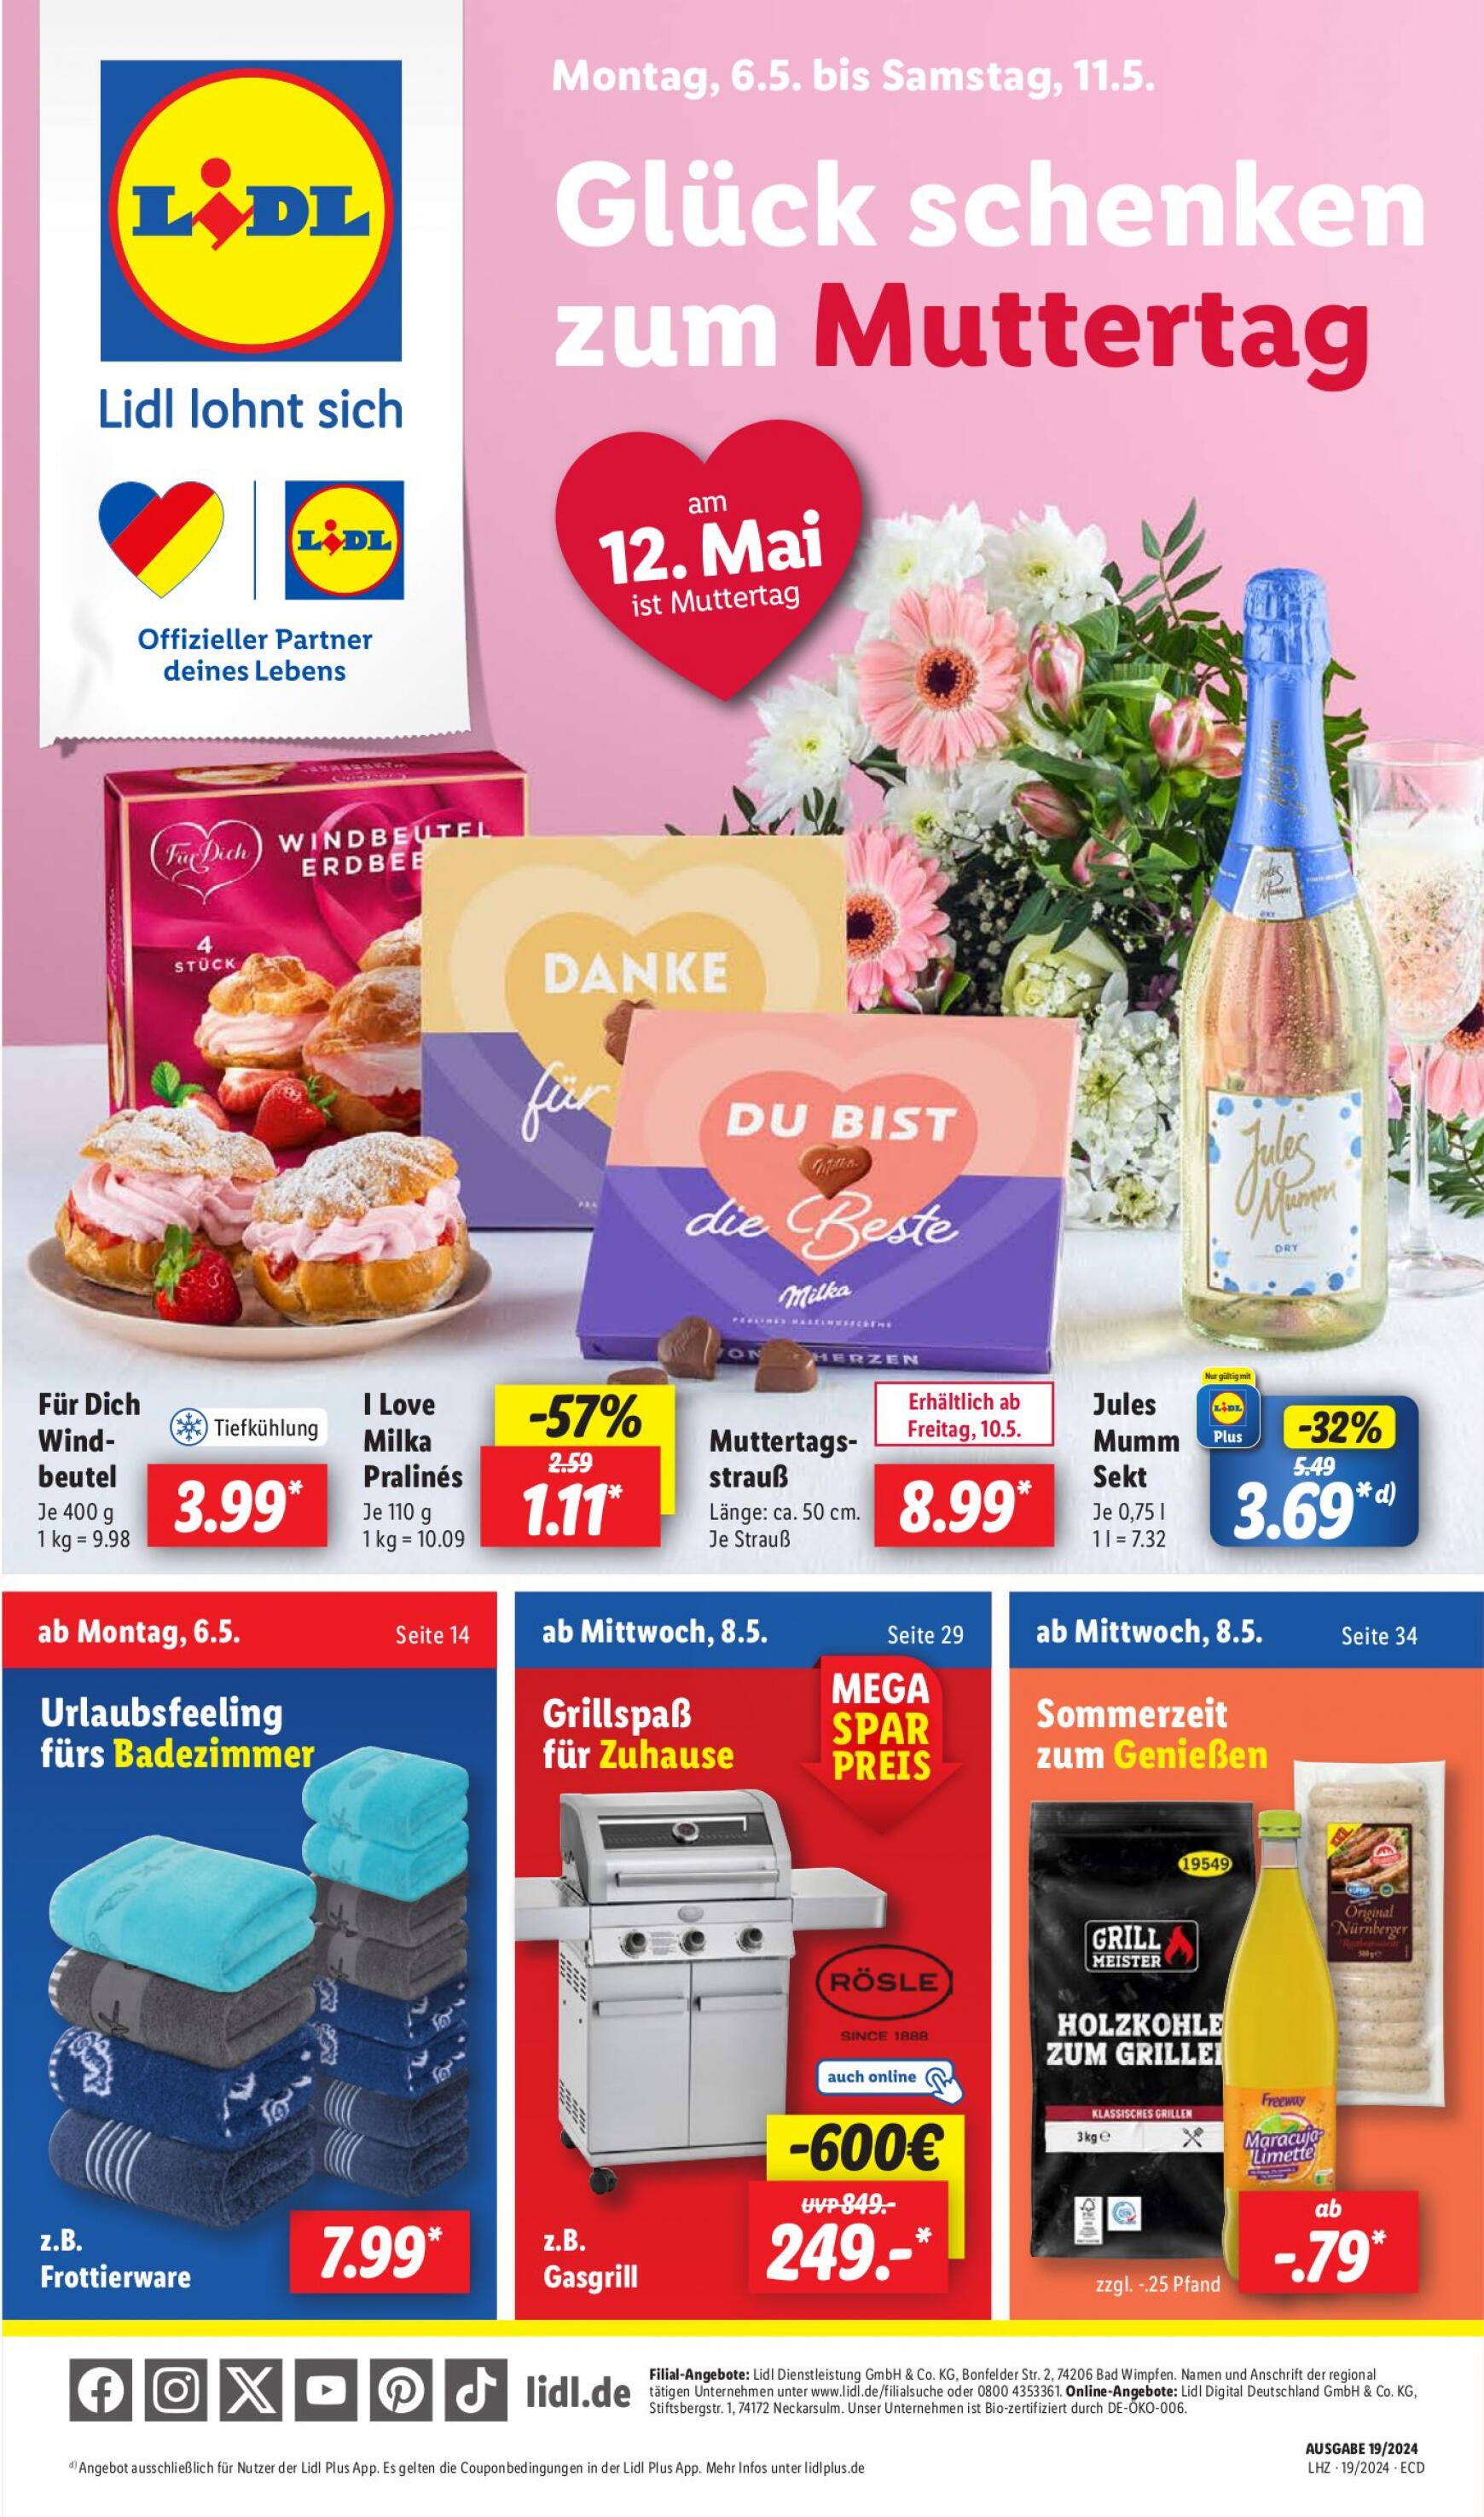 lidl - Flyer Lidl aktuell 06.05. - 11.05. - page: 1